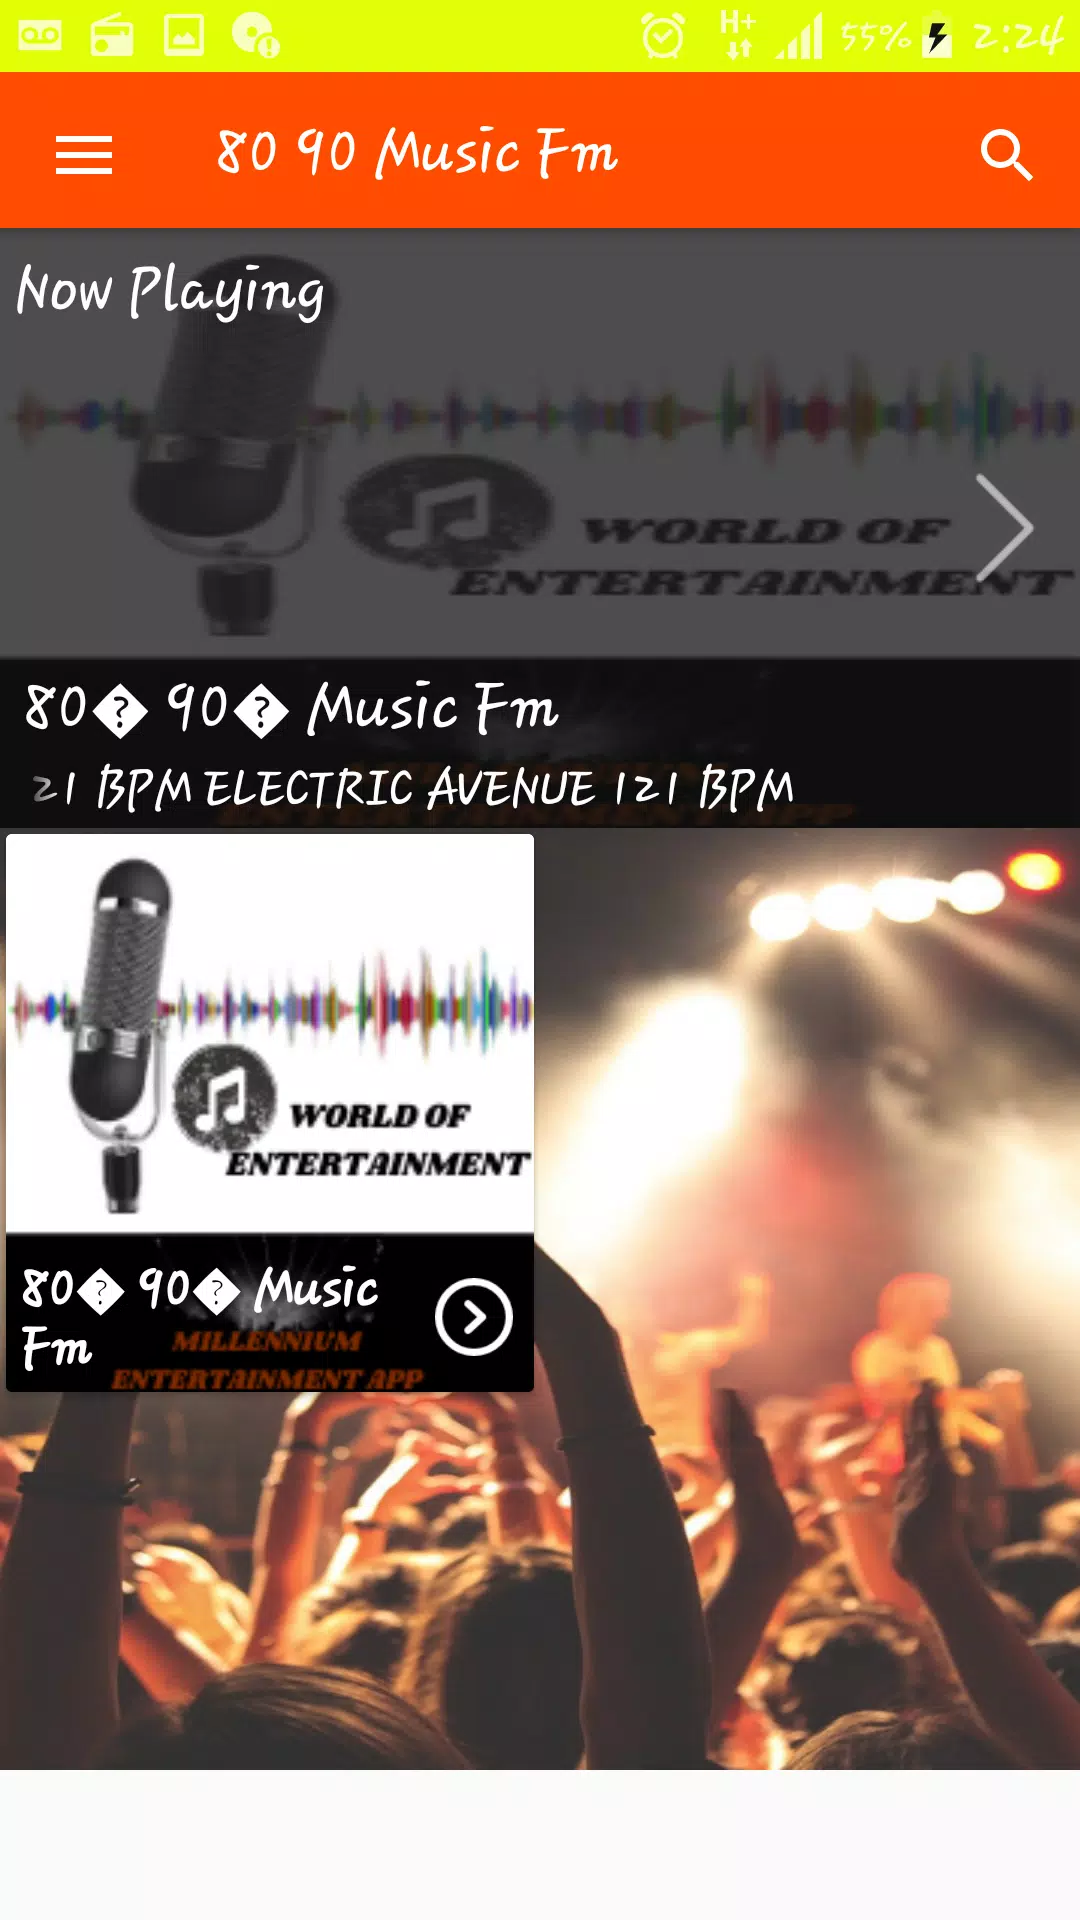 80 90 Music Radio Fm Radio Station Online New York for Android - APK  Download